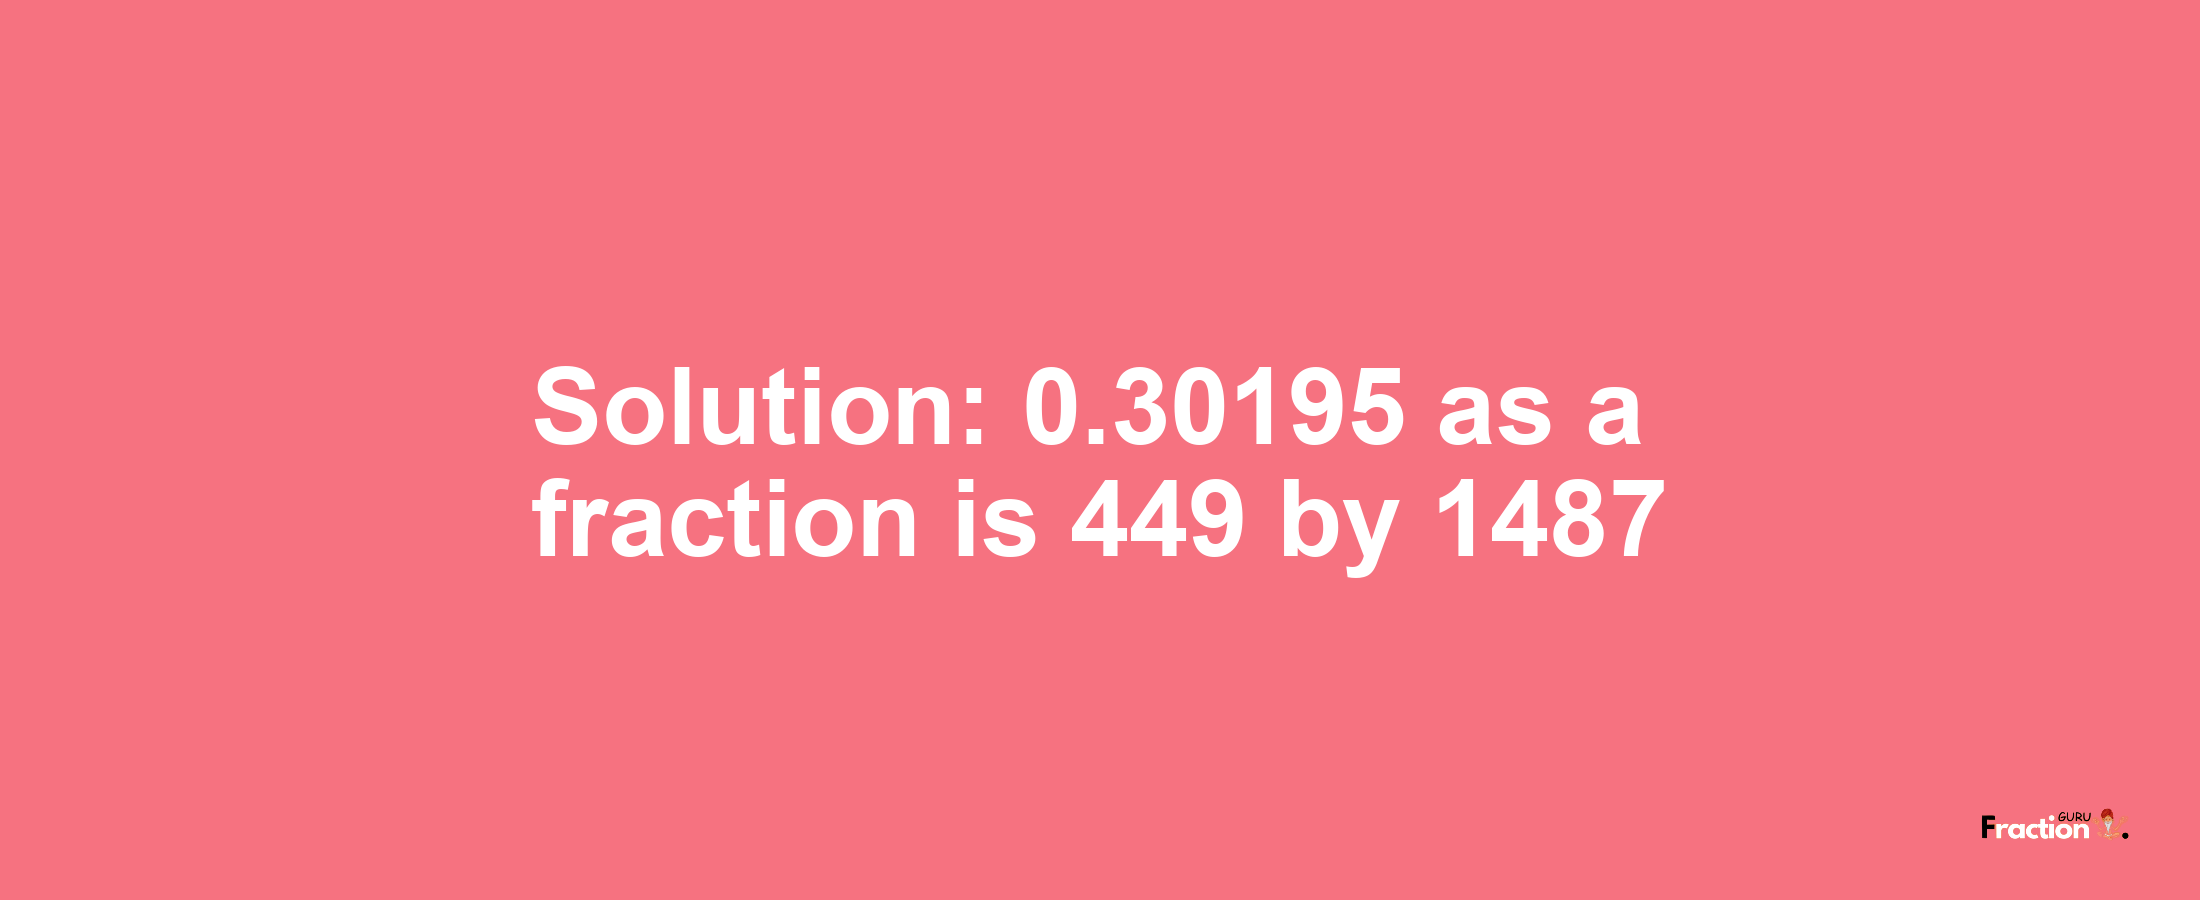 Solution:0.30195 as a fraction is 449/1487